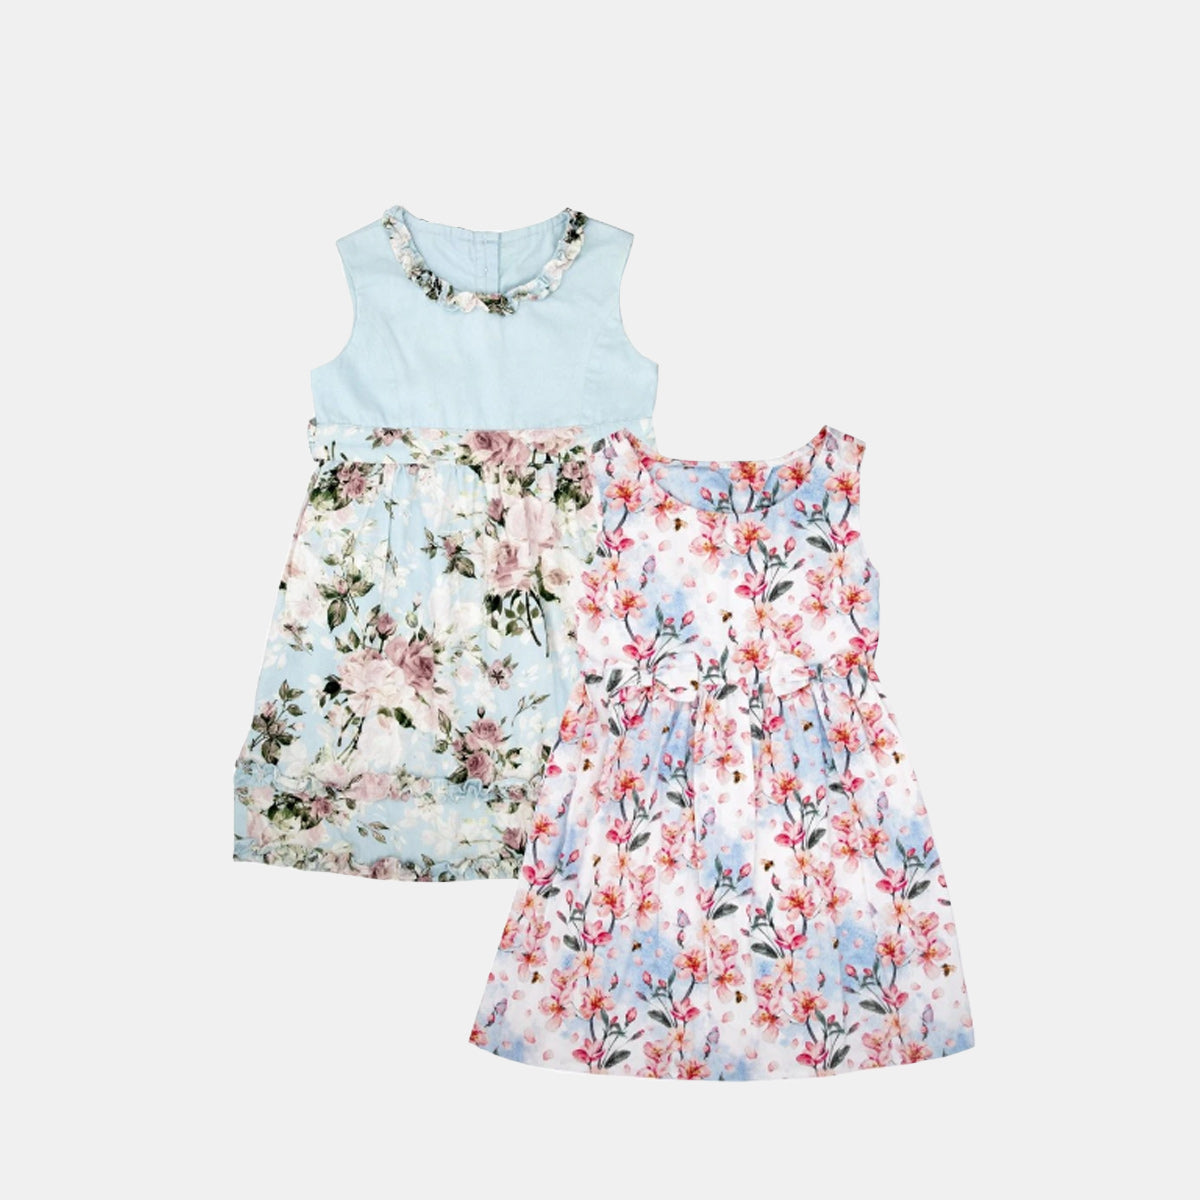 Floral Magic Pack of 2 Organic Cotton Dresses